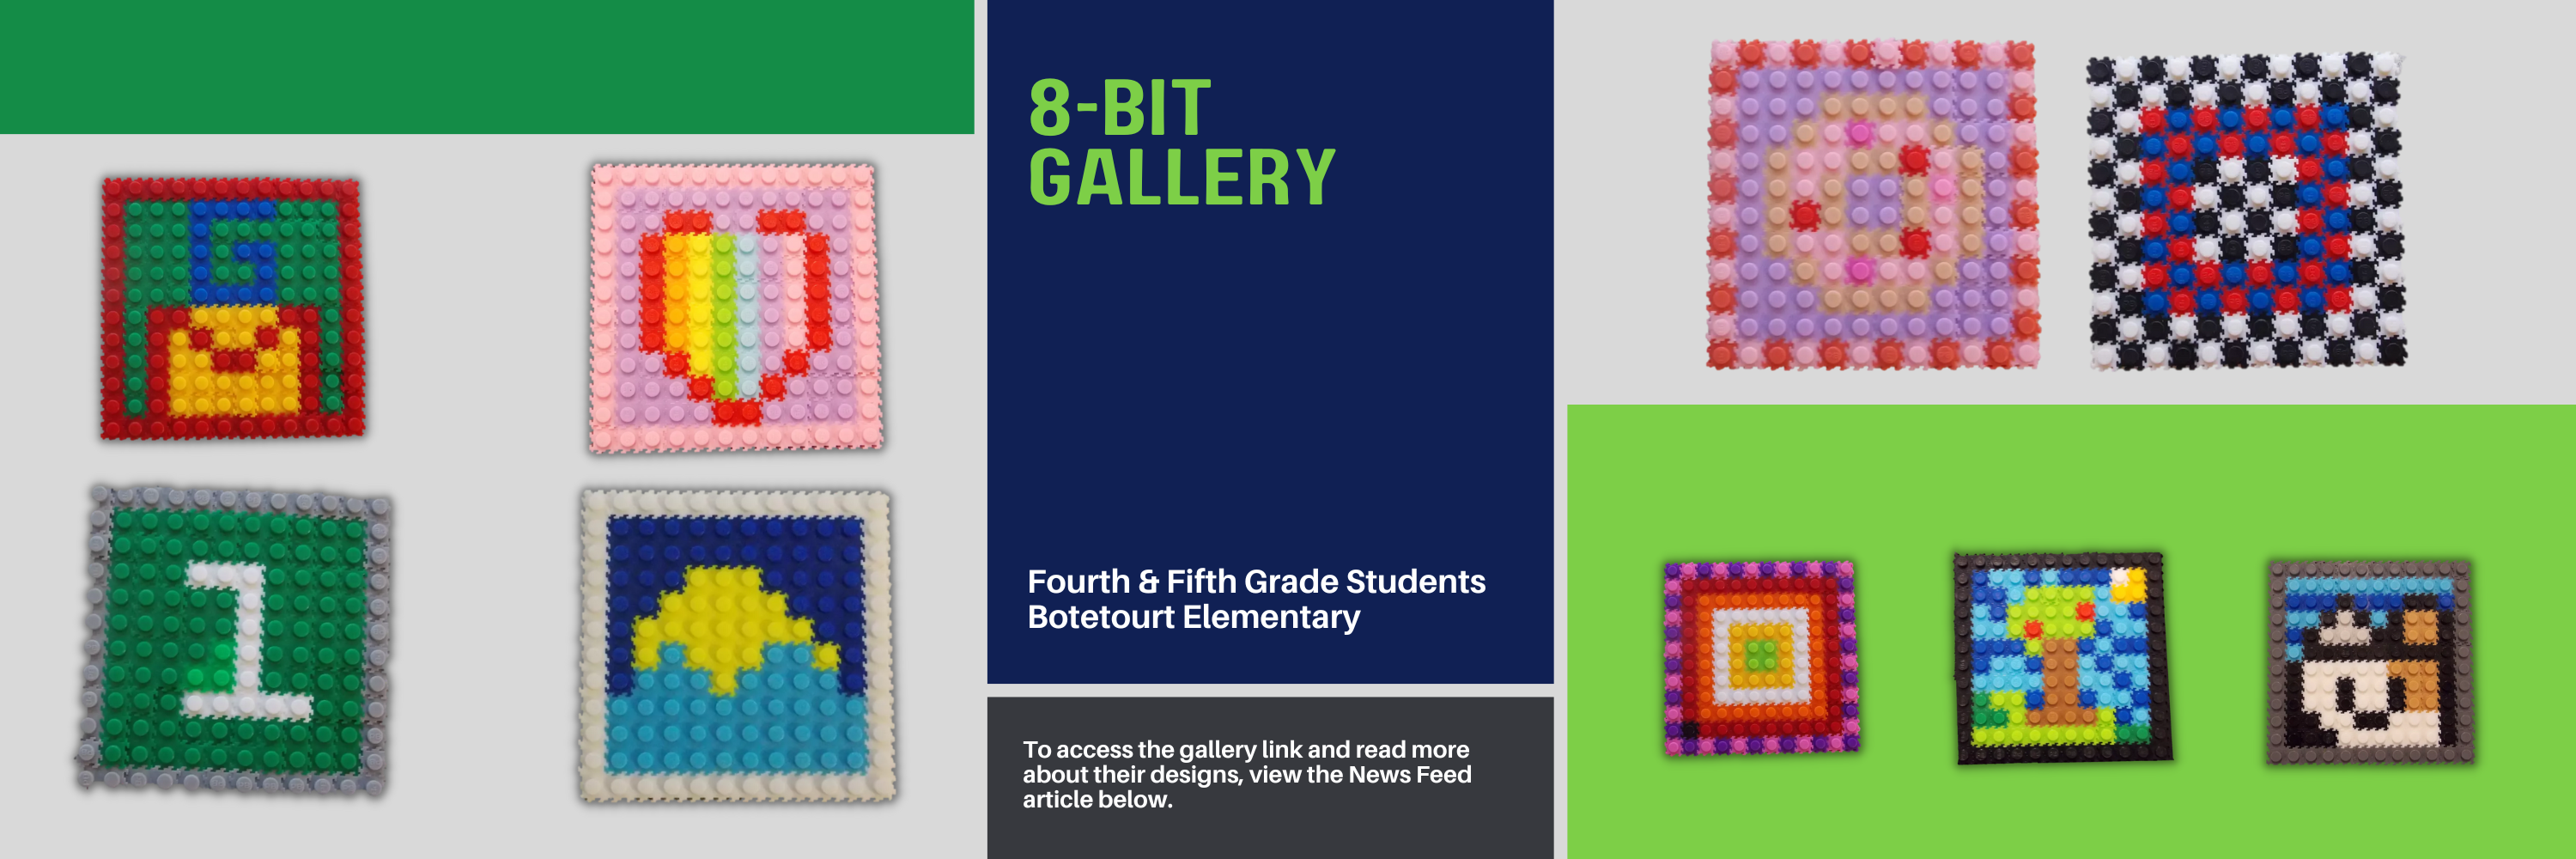 8-Bit gallery from botetourt elementary's fourth and fifth grade students. To access the gallery link and read more about their designs, view the news feed article below.